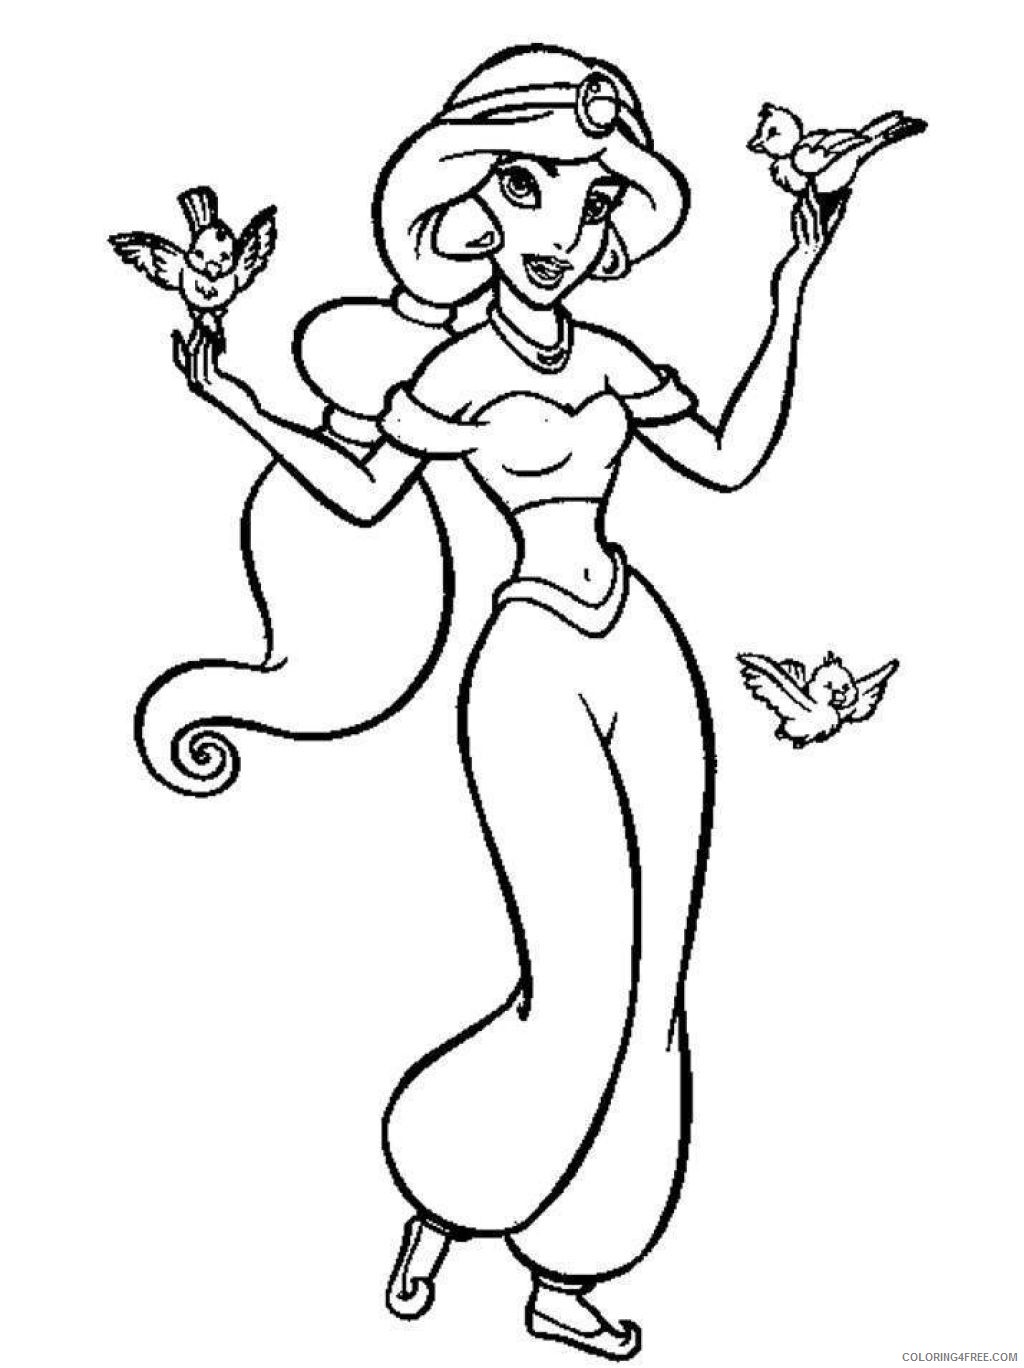 jasmine coloring pages with birds Coloring4free